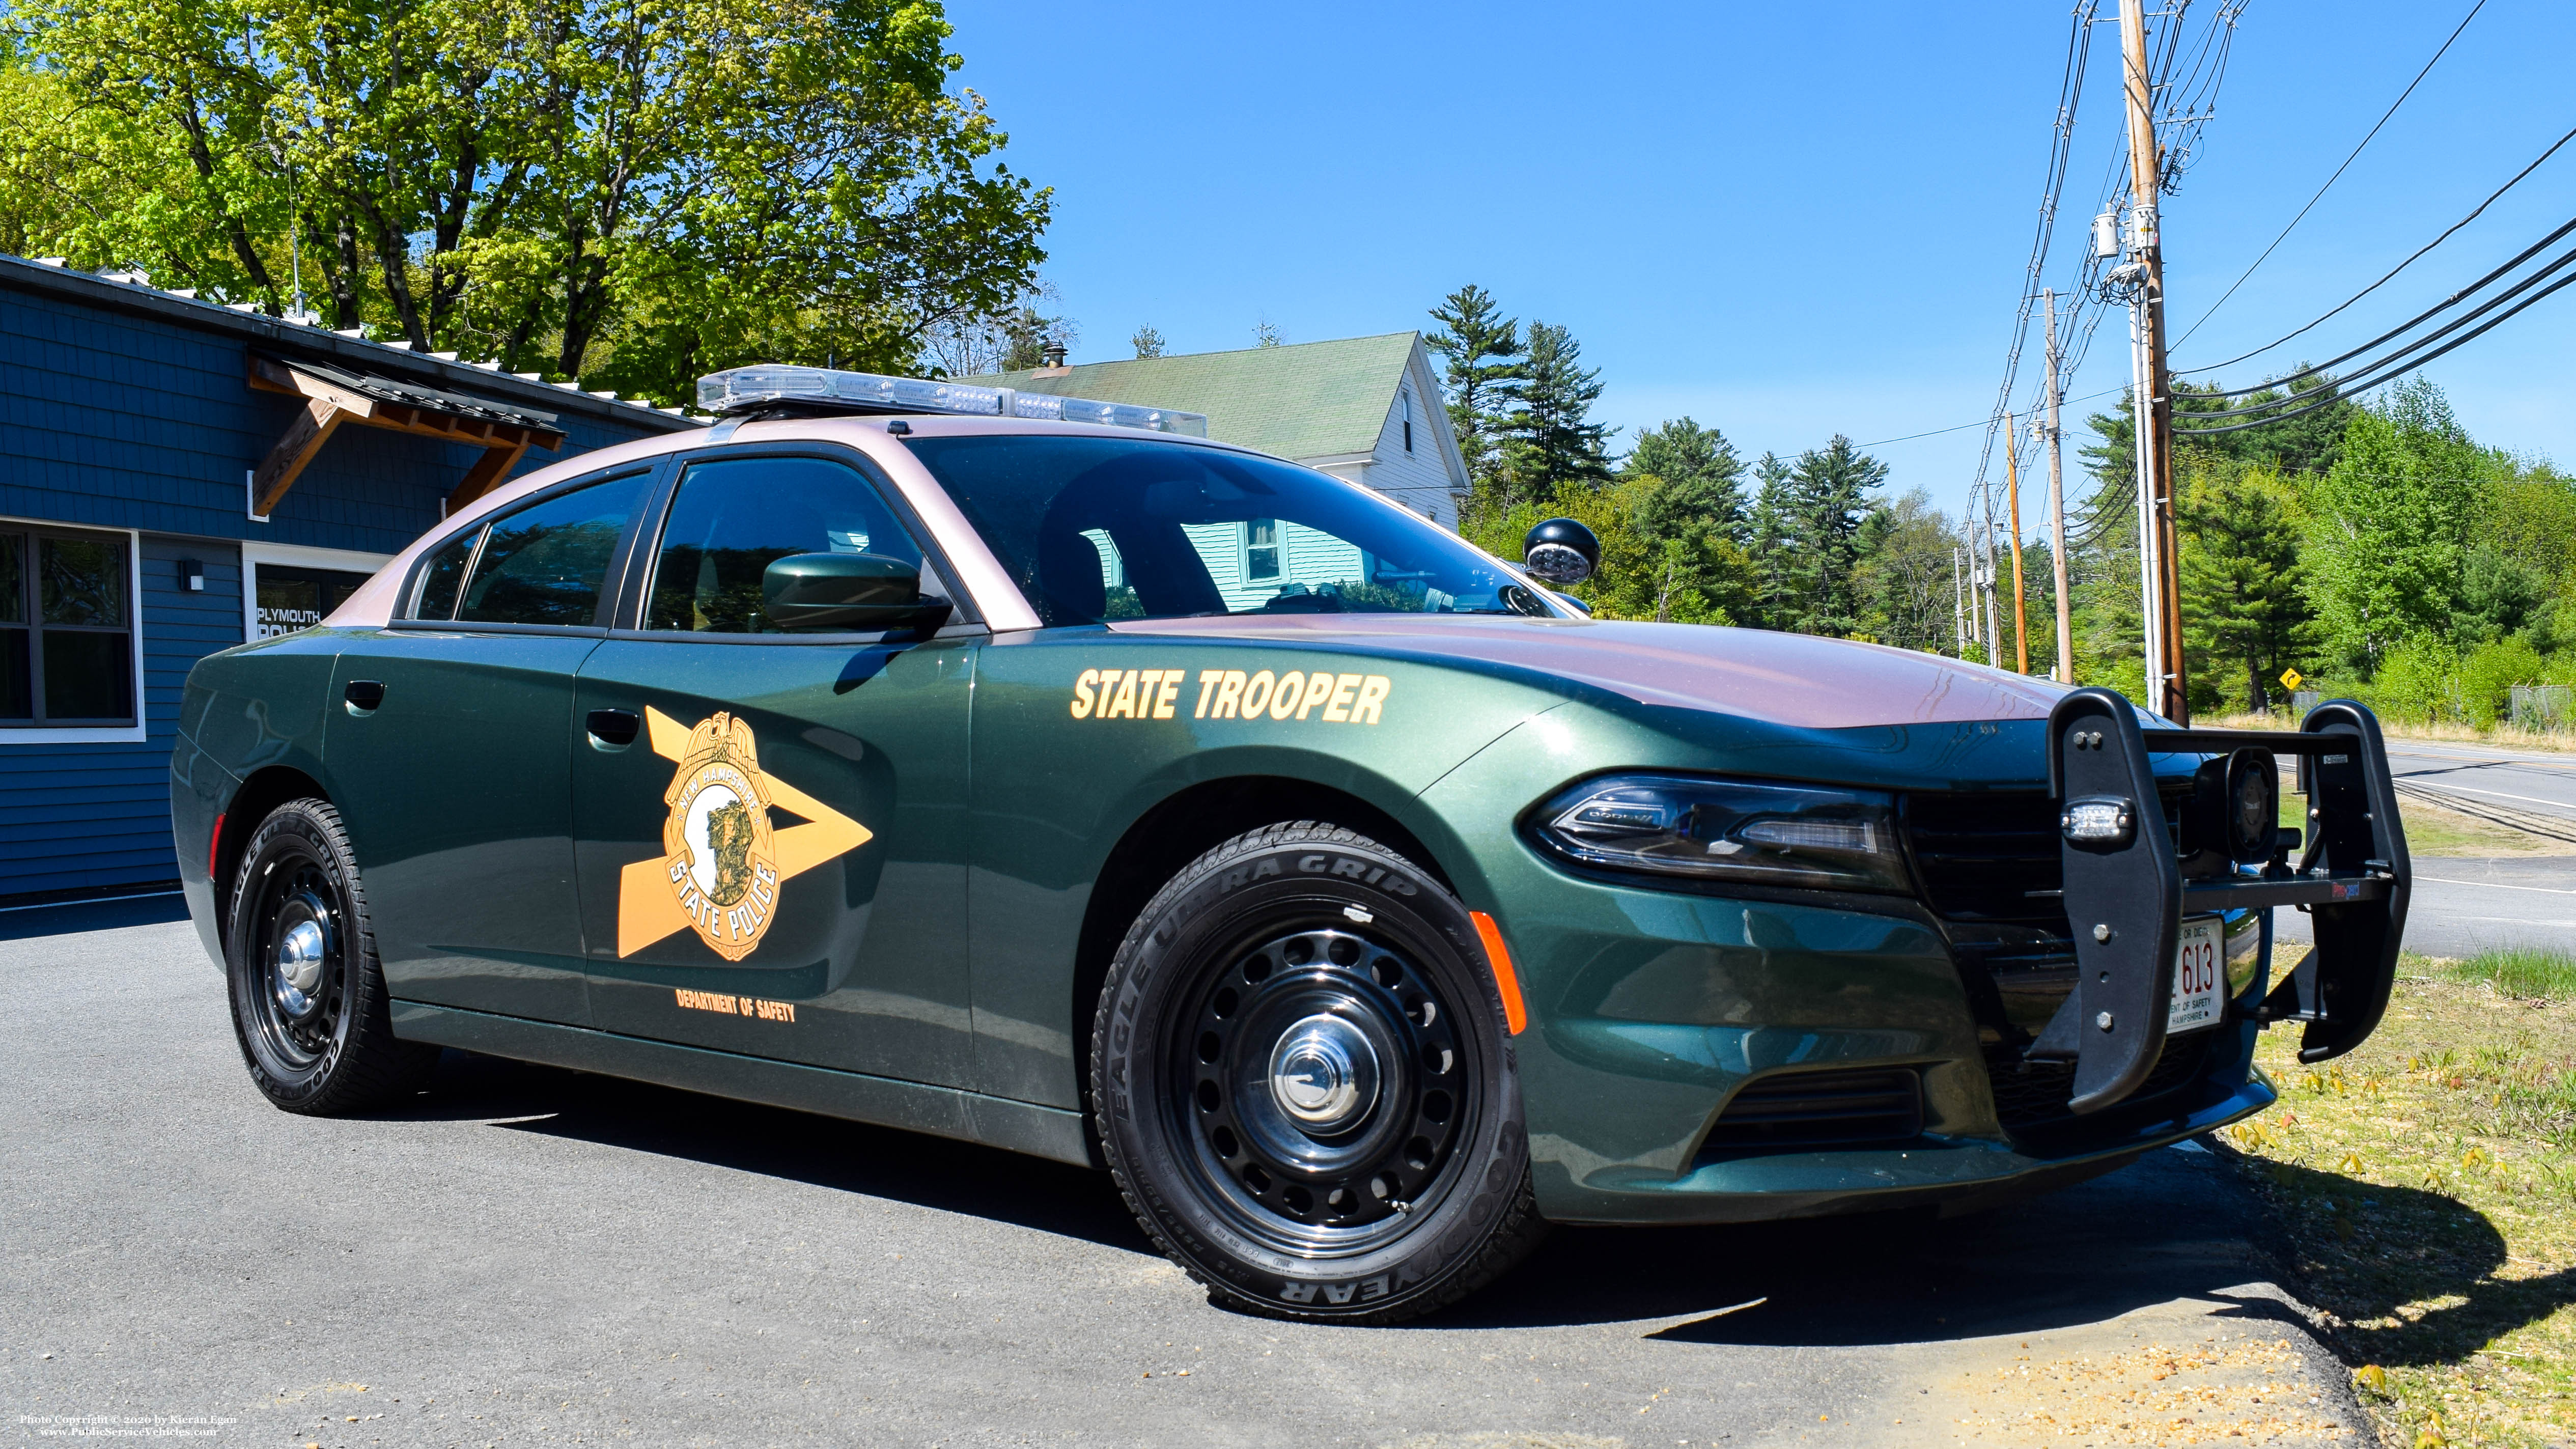 A photo  of New Hampshire State Police
            Cruiser 613, a 2017 Dodge Charger             taken by Kieran Egan